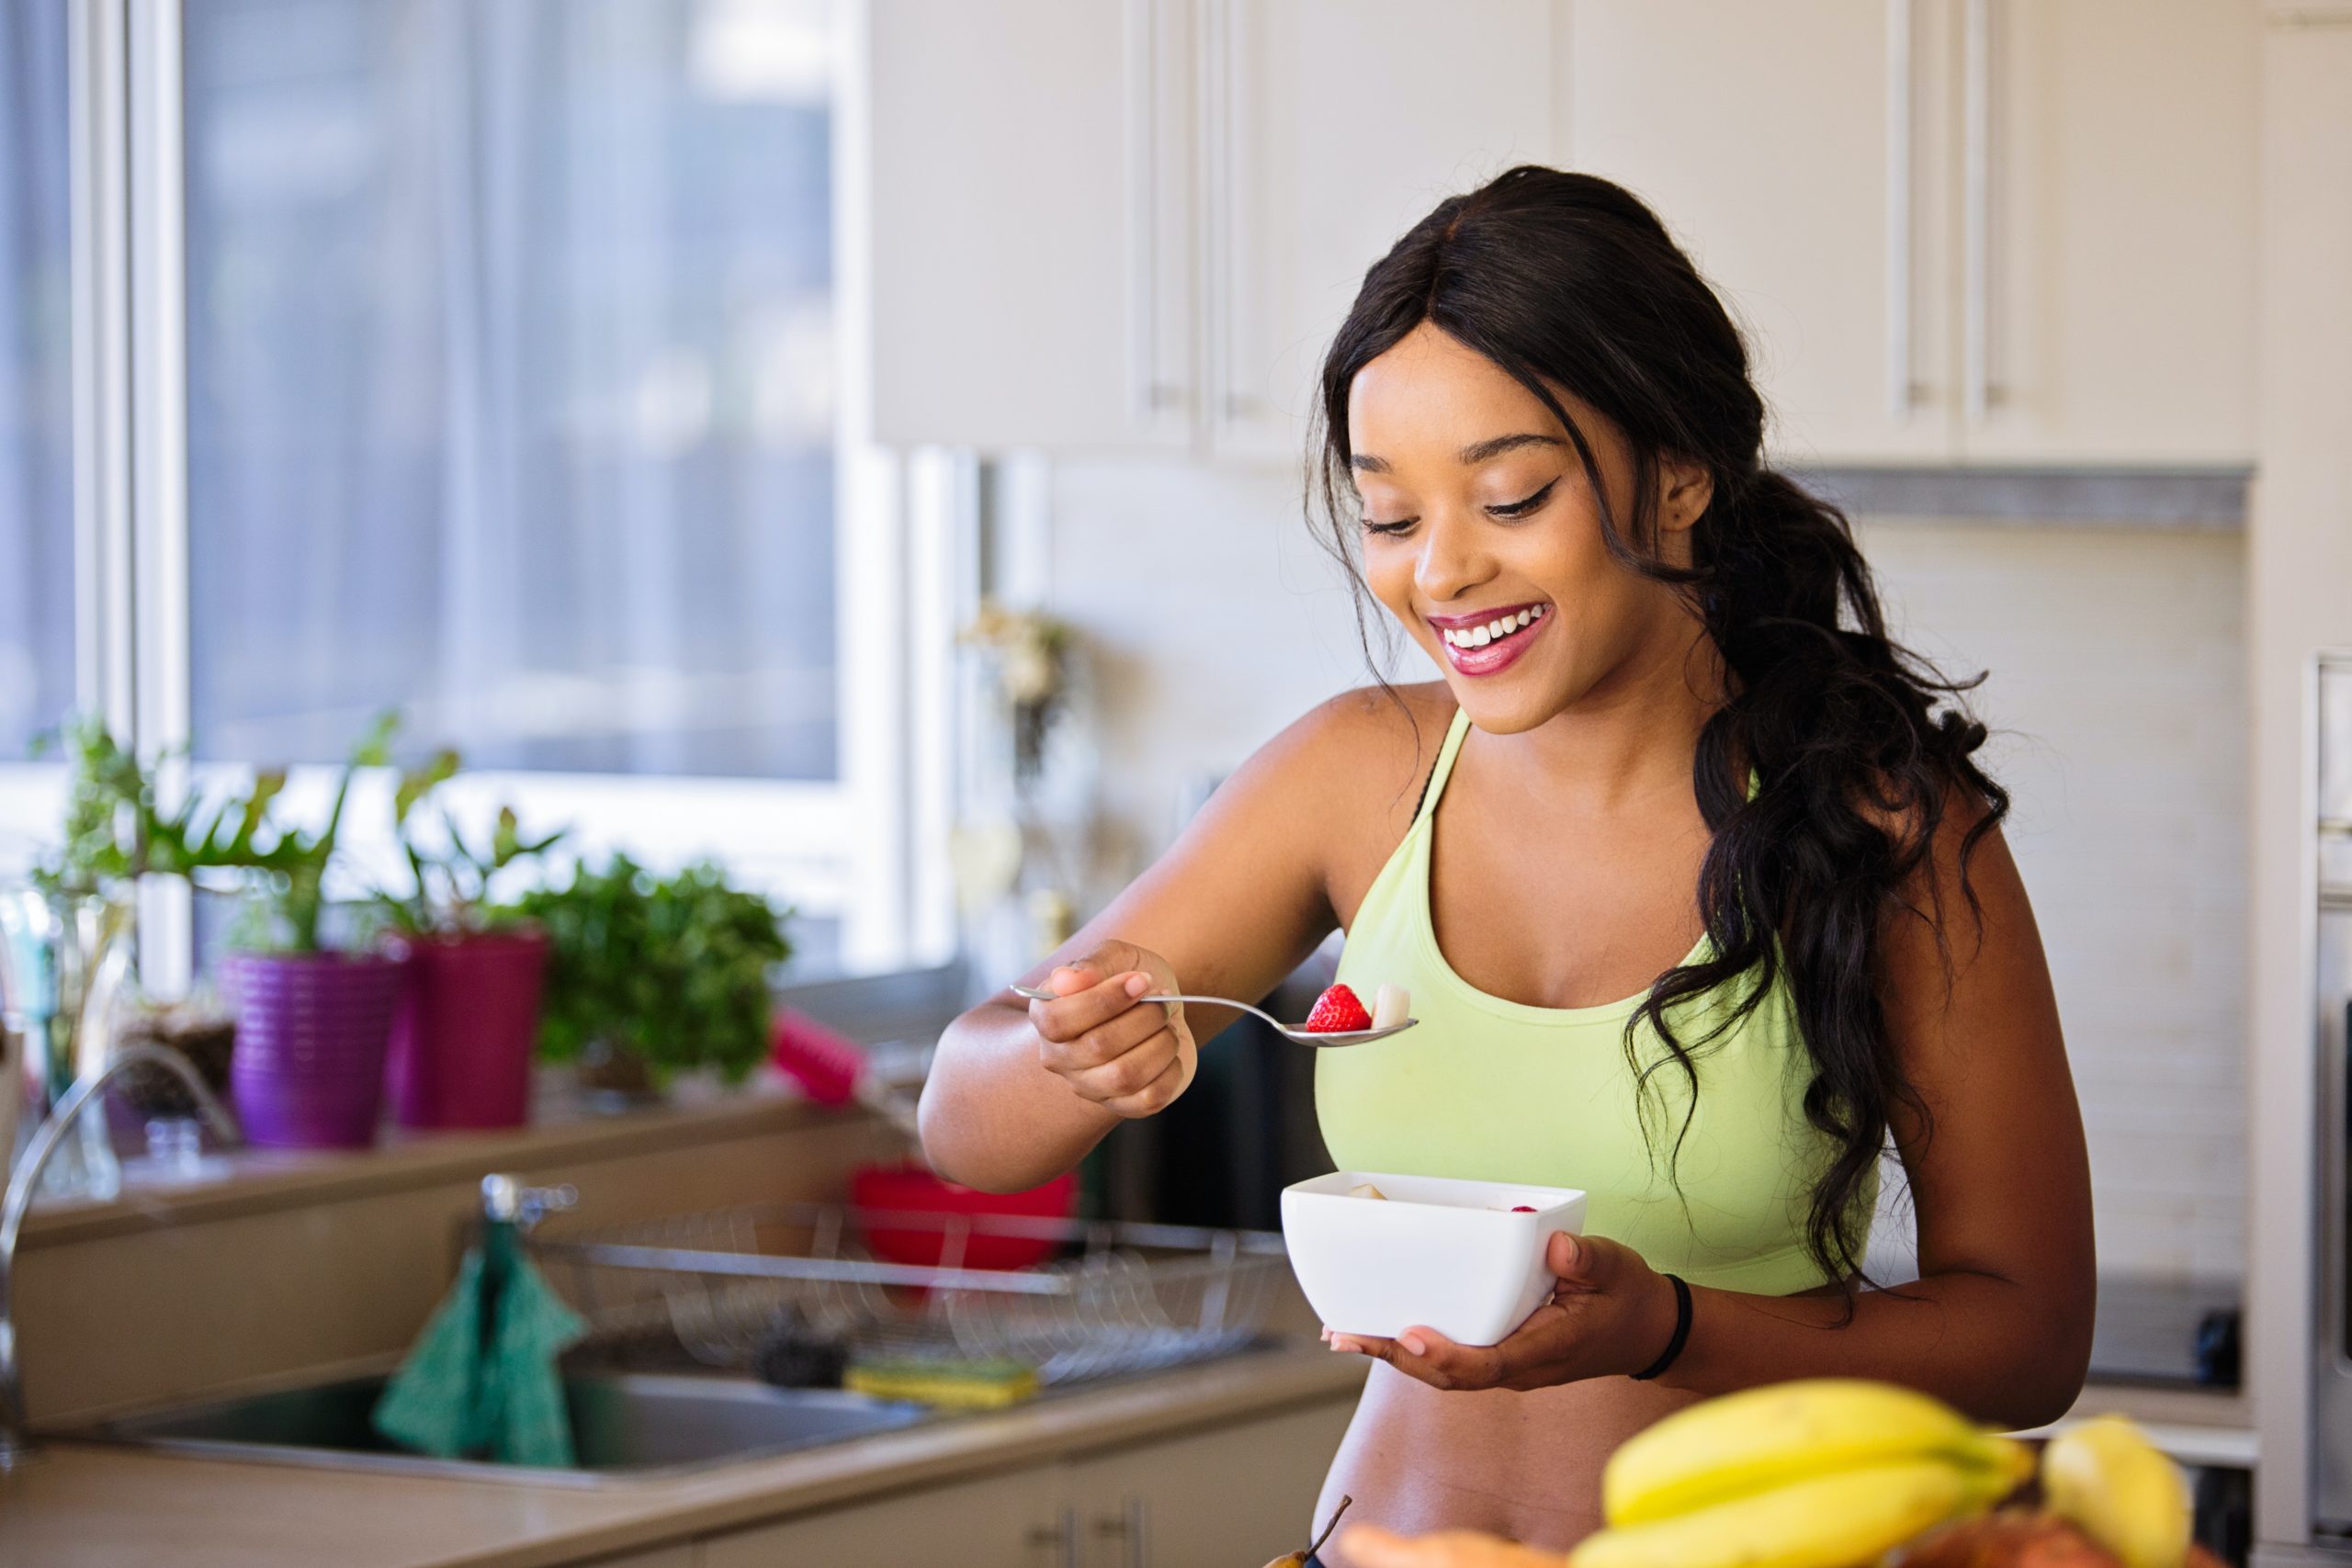 Put Your Health & Nutrition Into Practice With Mindful Eating by Koya Webb